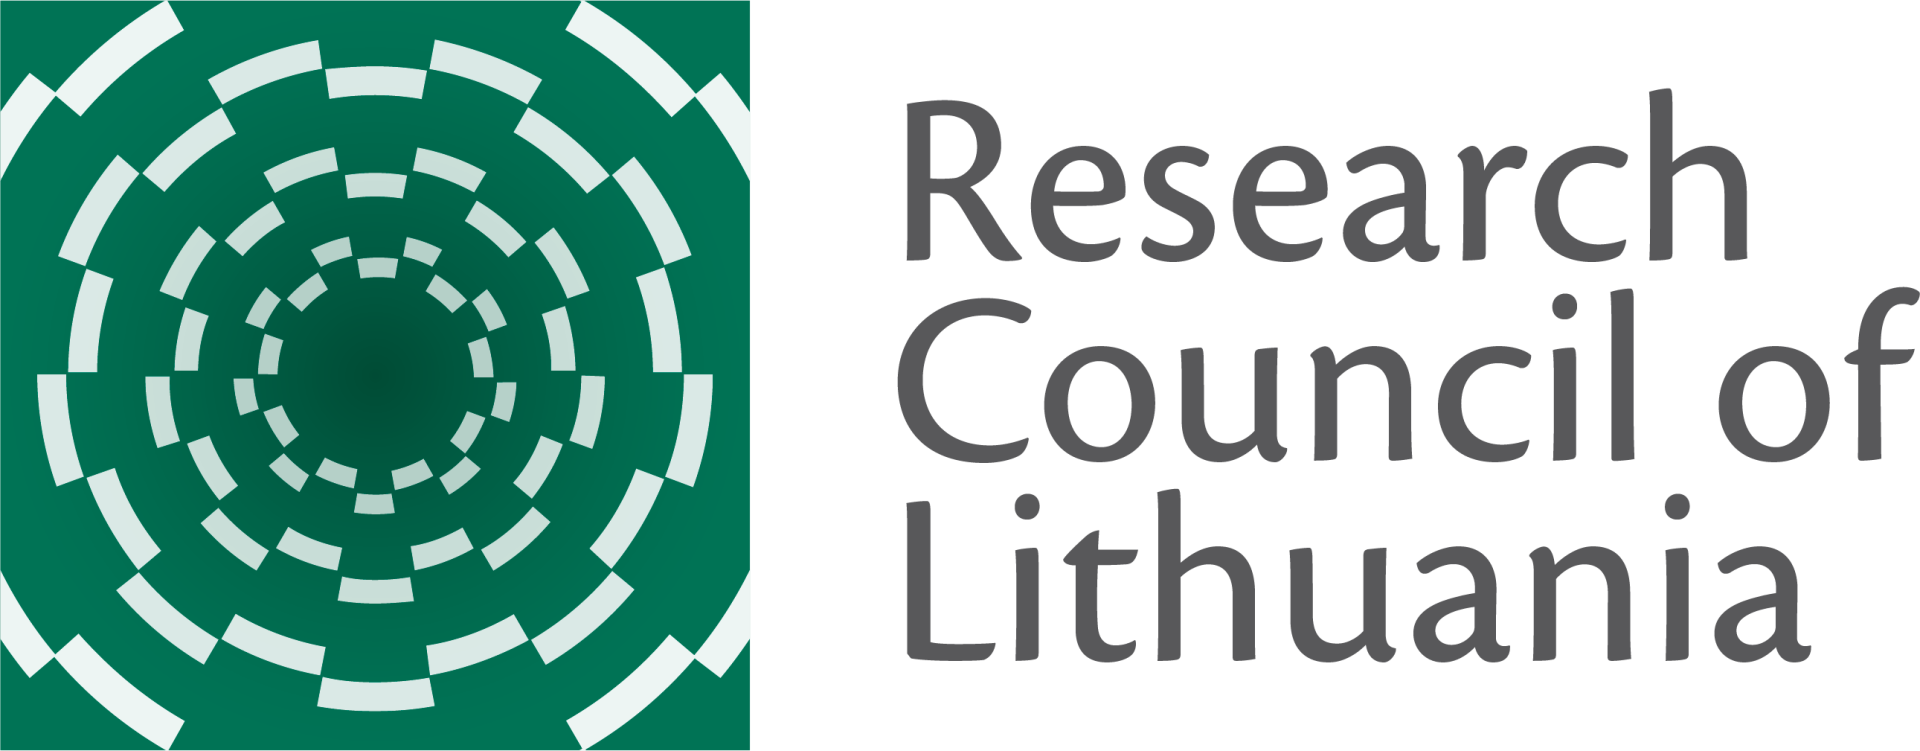 RESEARCH COUNCIL OF LITHUANIA